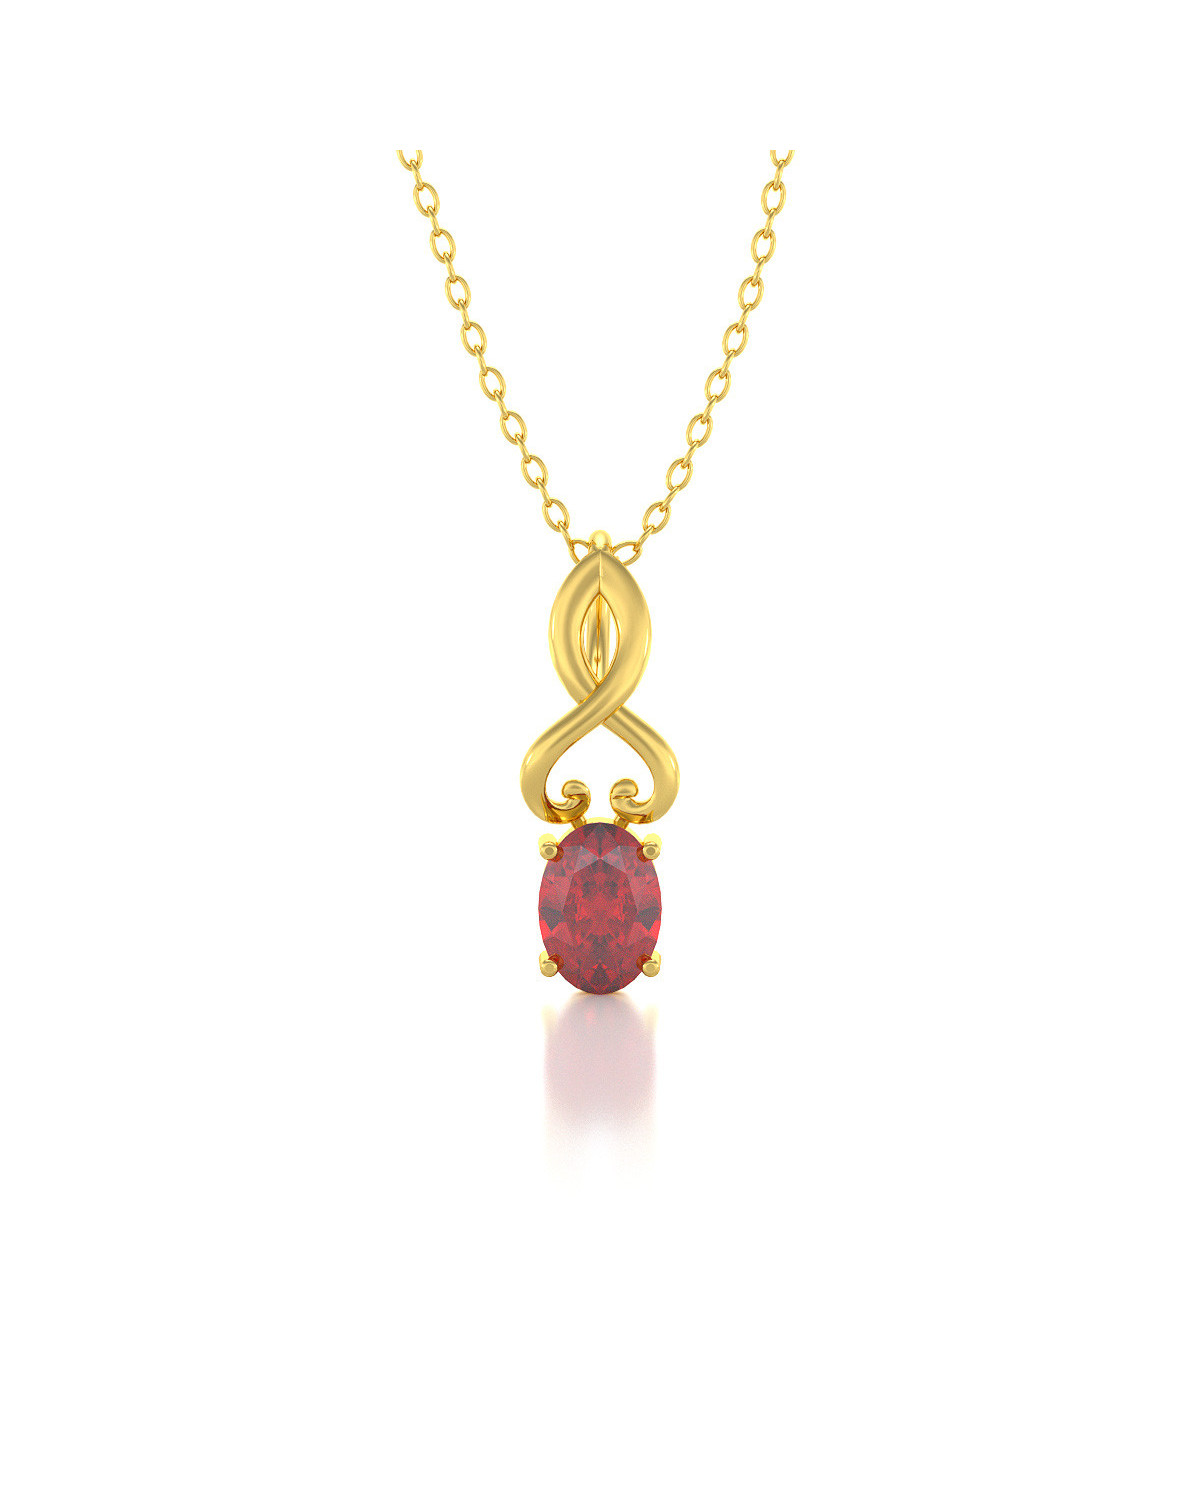 Collier Pendentif Or Jaune Rubis Chaine Or incluse 0.85grs